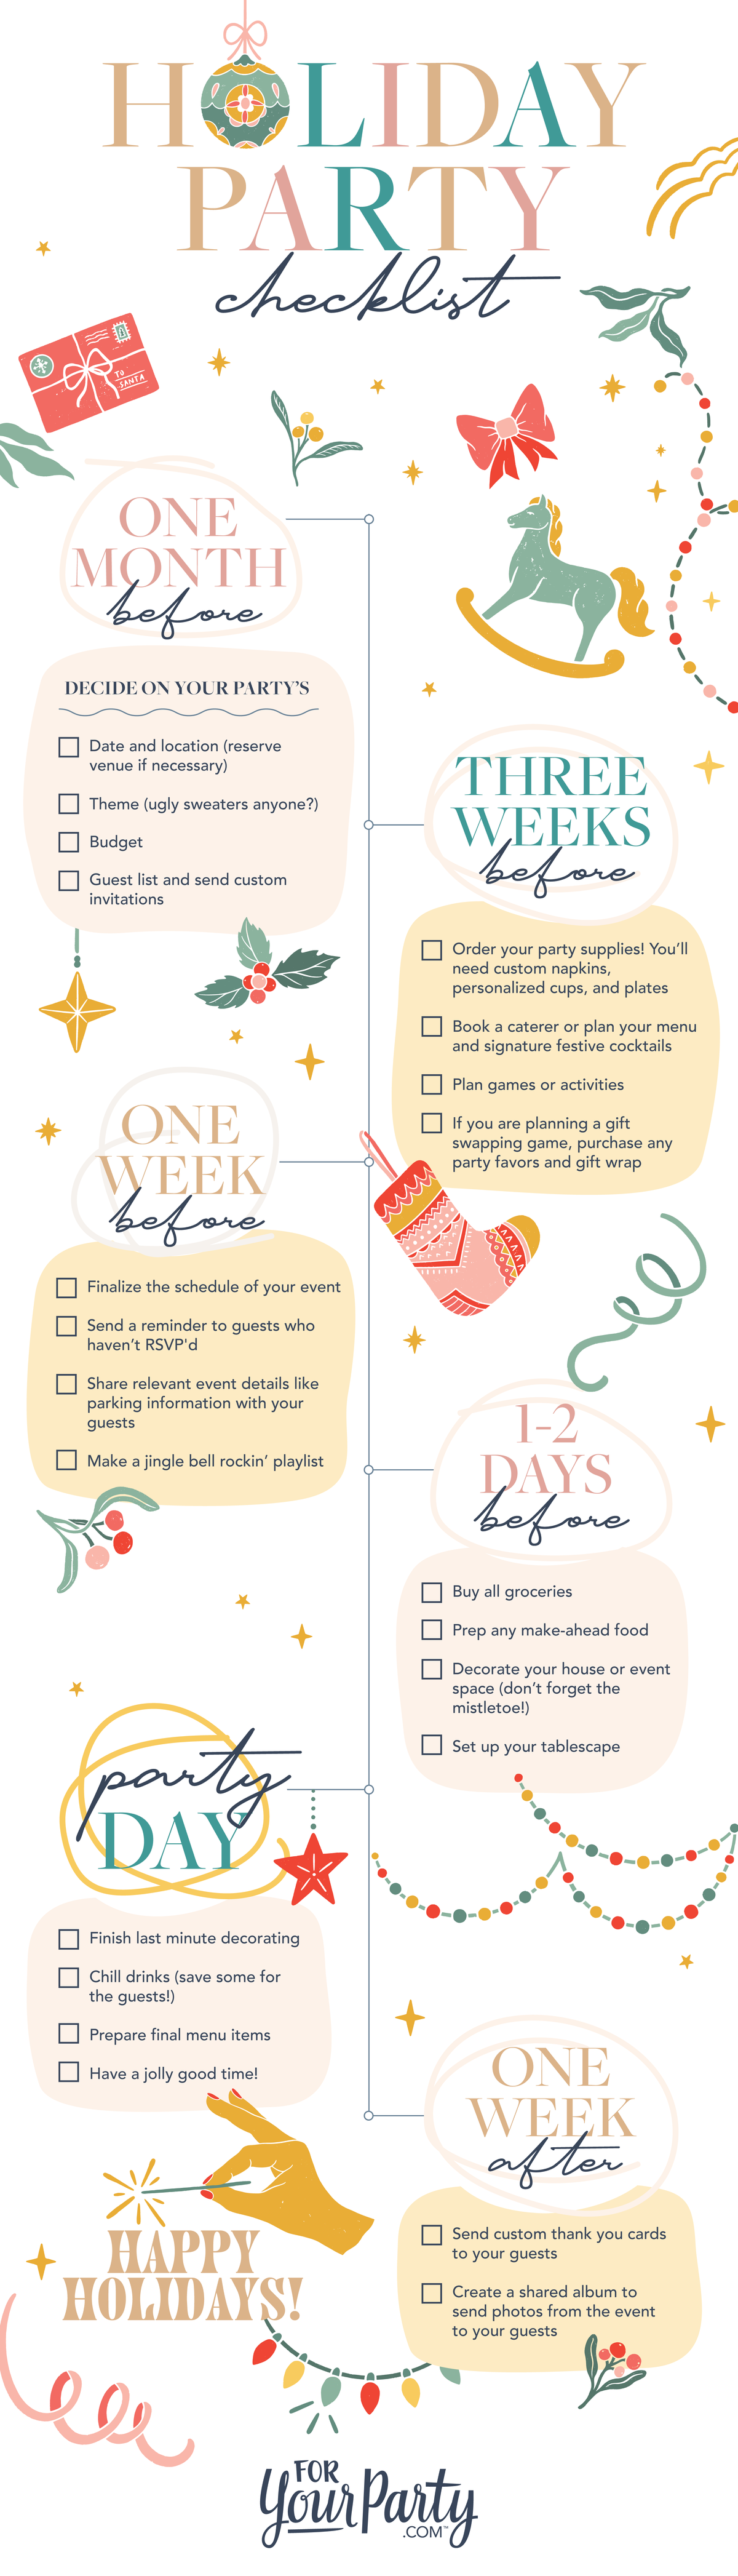 10 Things To Consider When Planning Your Company Holiday Party! - Picnic  People